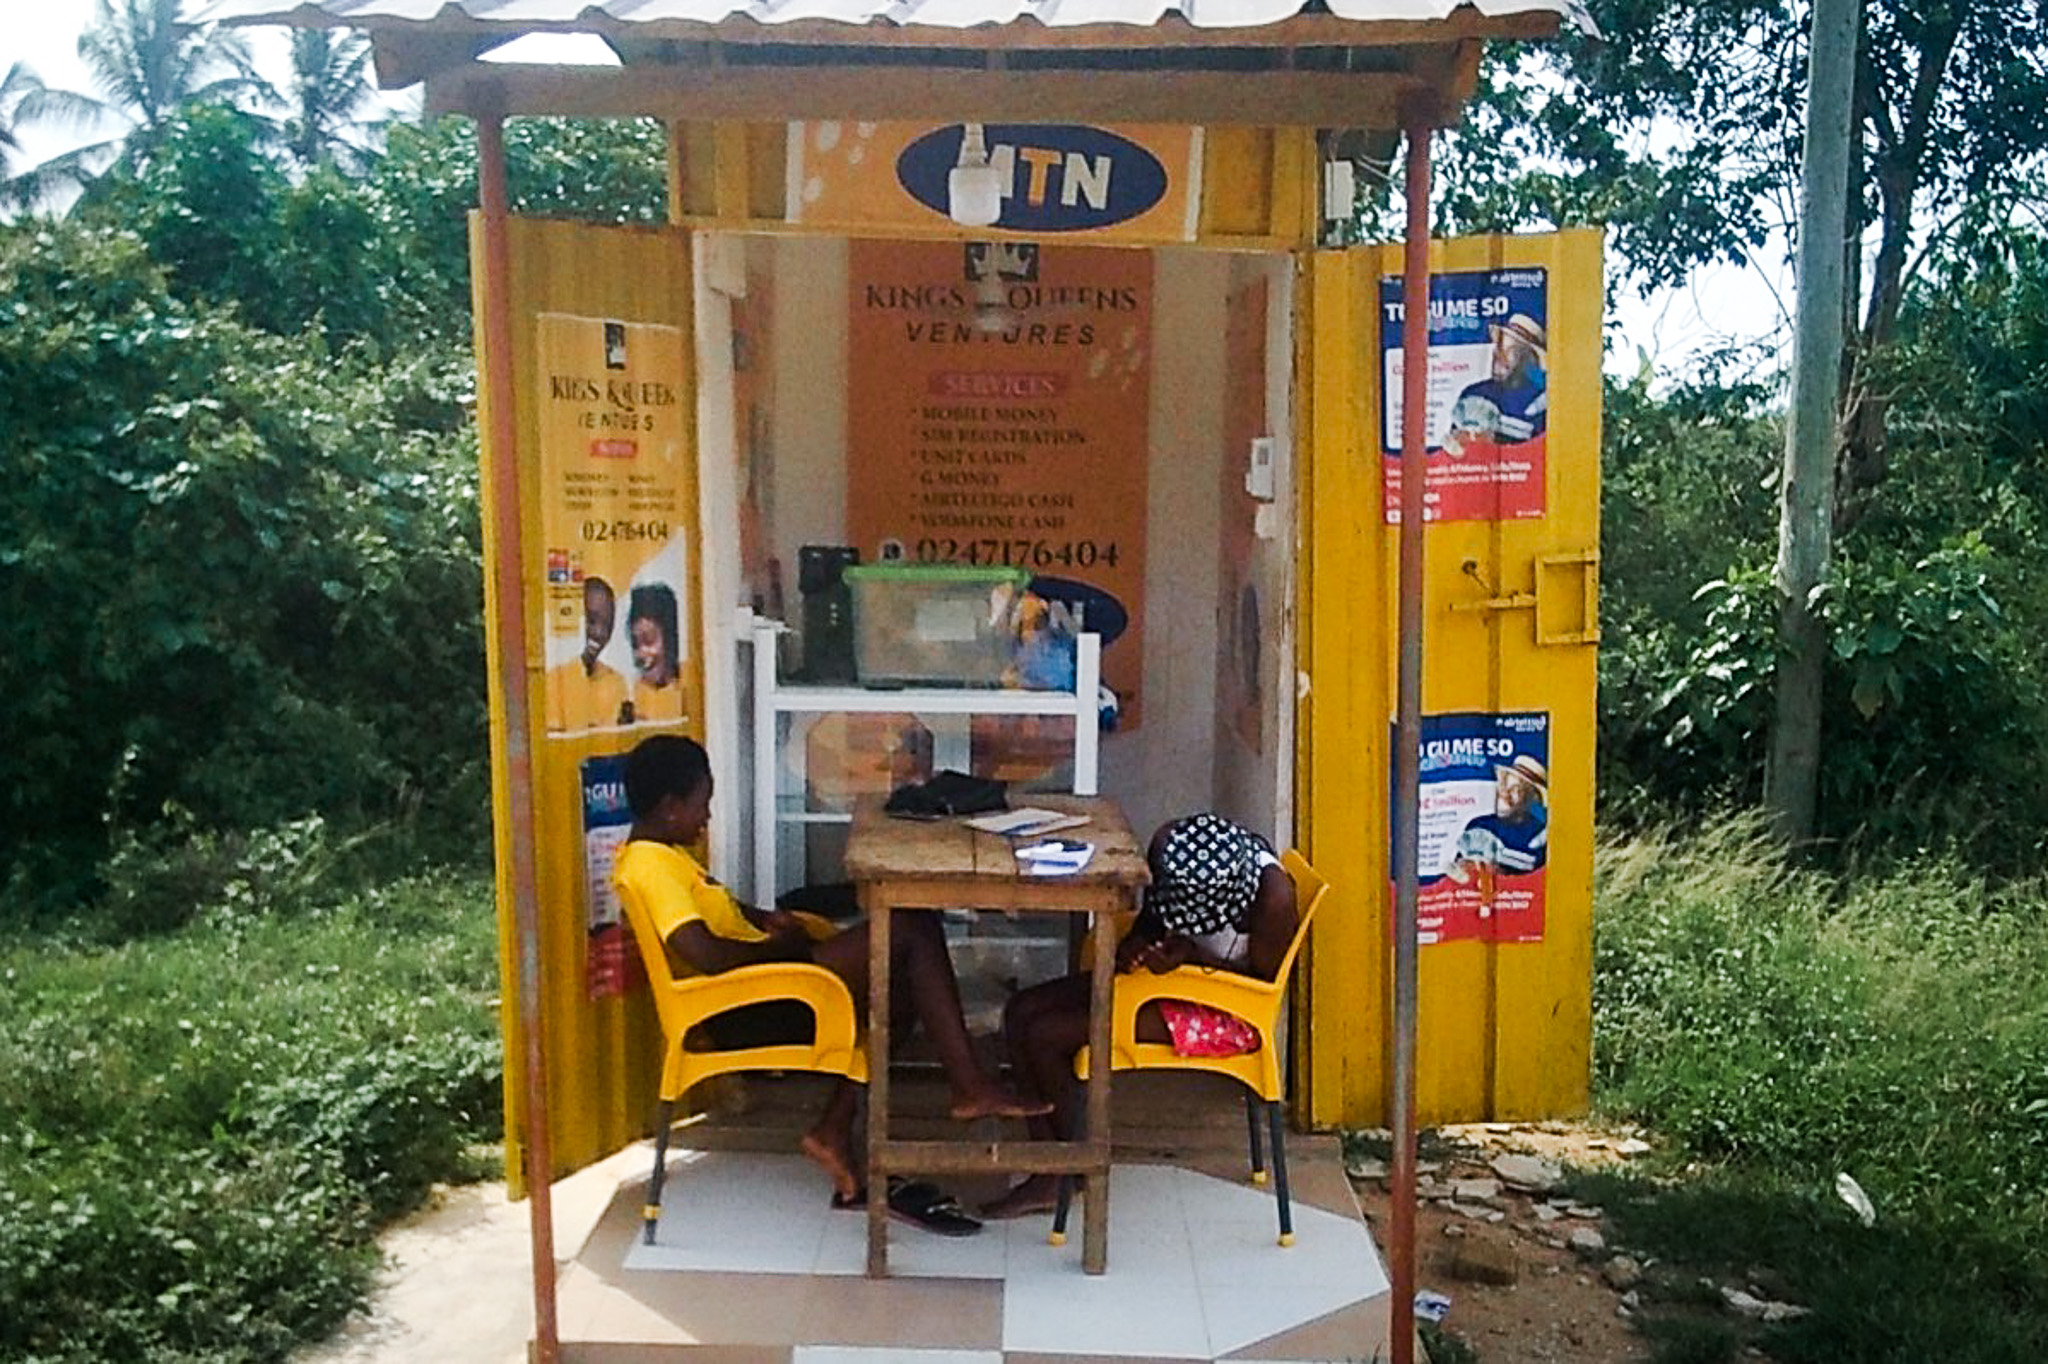  A mobile money agent outlet that vend digital financial services (retail mobile money, airtime, SIM cards, etc) in Krodua — a village in eastern Ghana. © 2023 Mary Appiah, GCB Bank PLC, G-Money